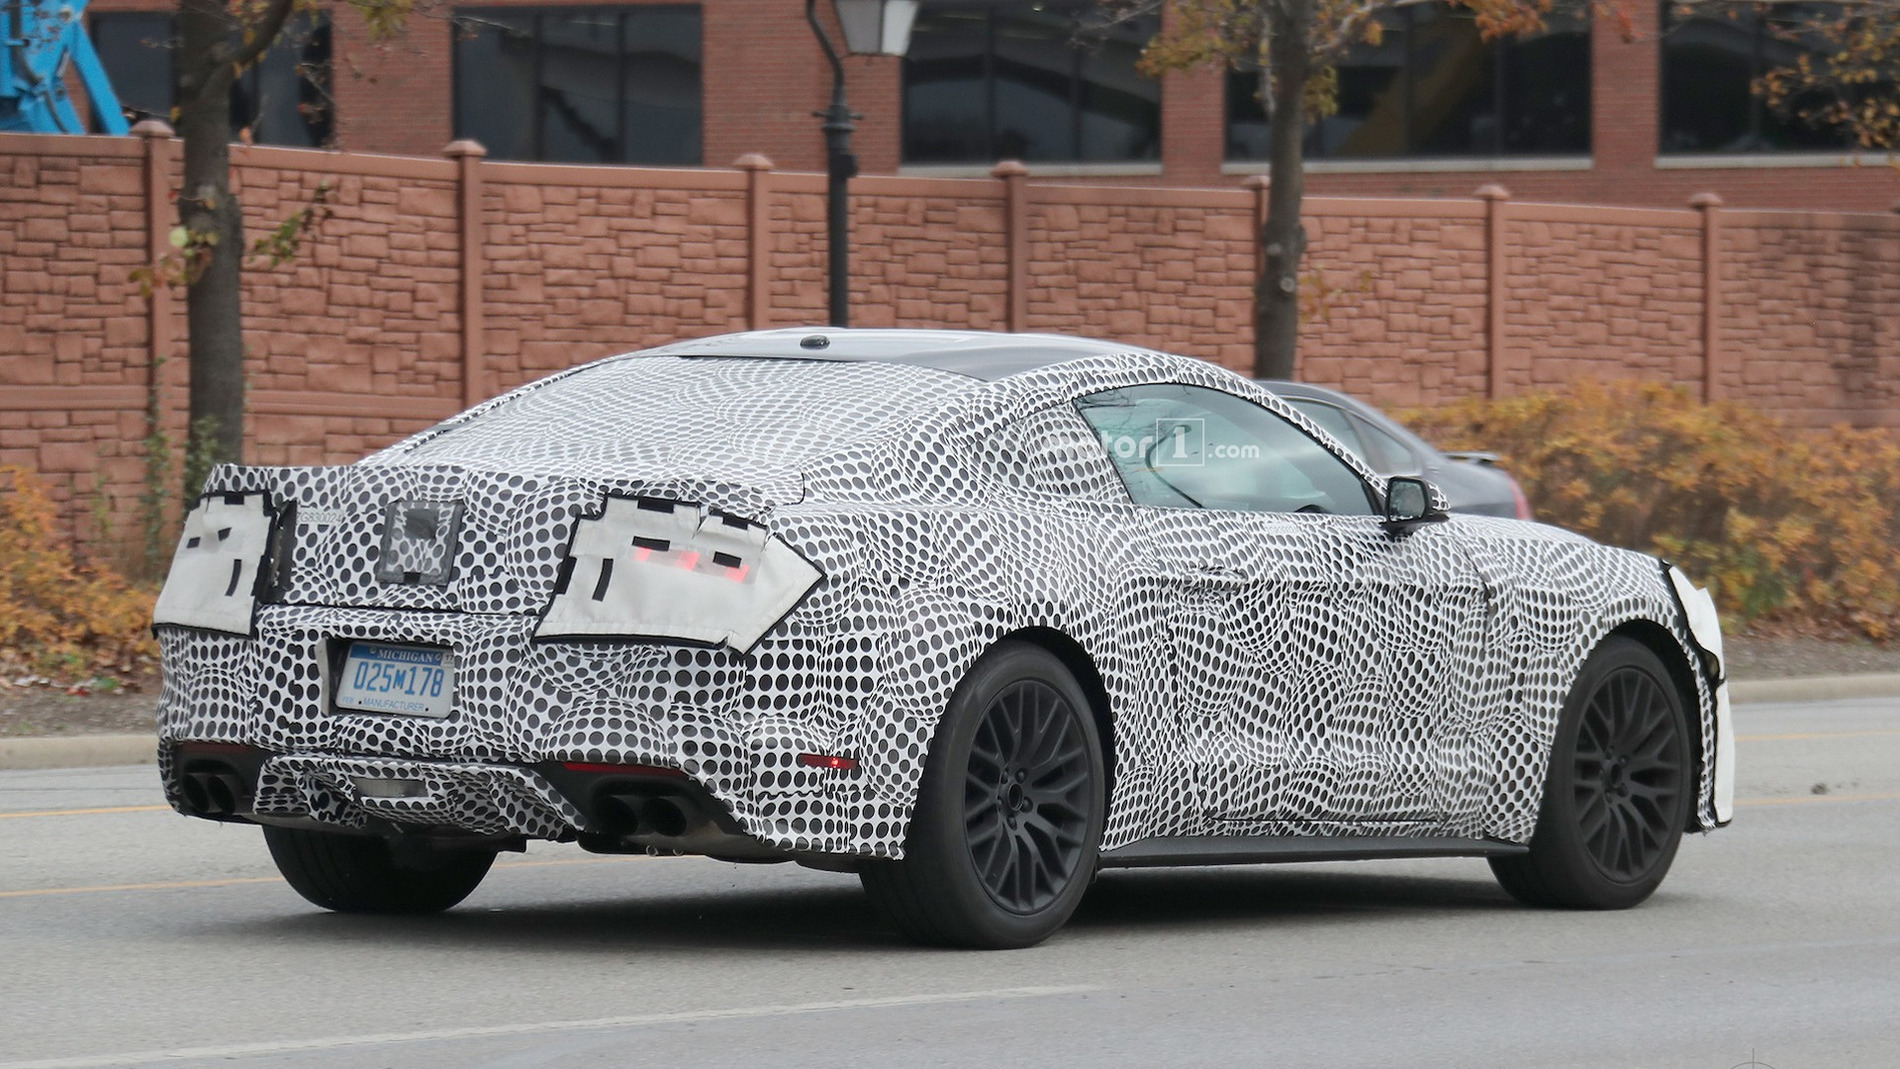 2018-ford-mustang-gt-coupe-spy-photos.jpg